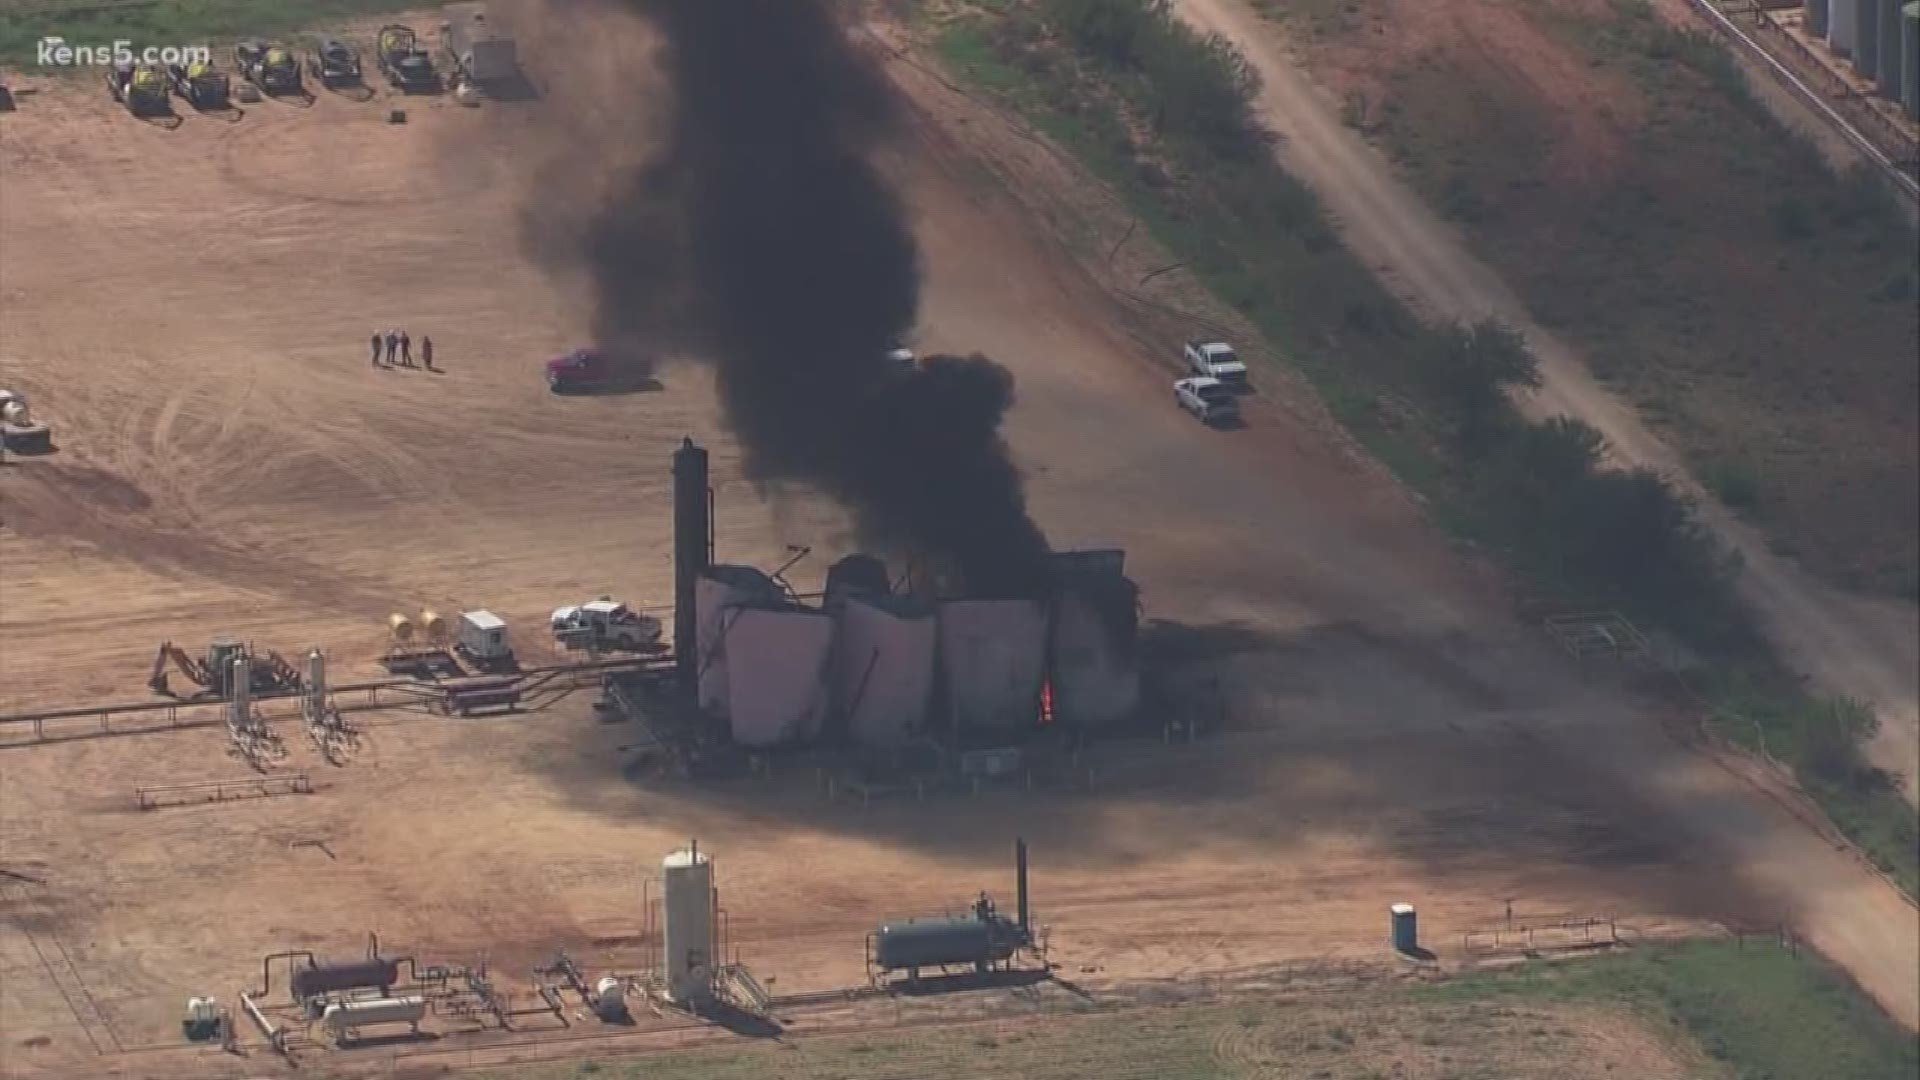 Two injured in oil tank explosion near Dilley, Texas